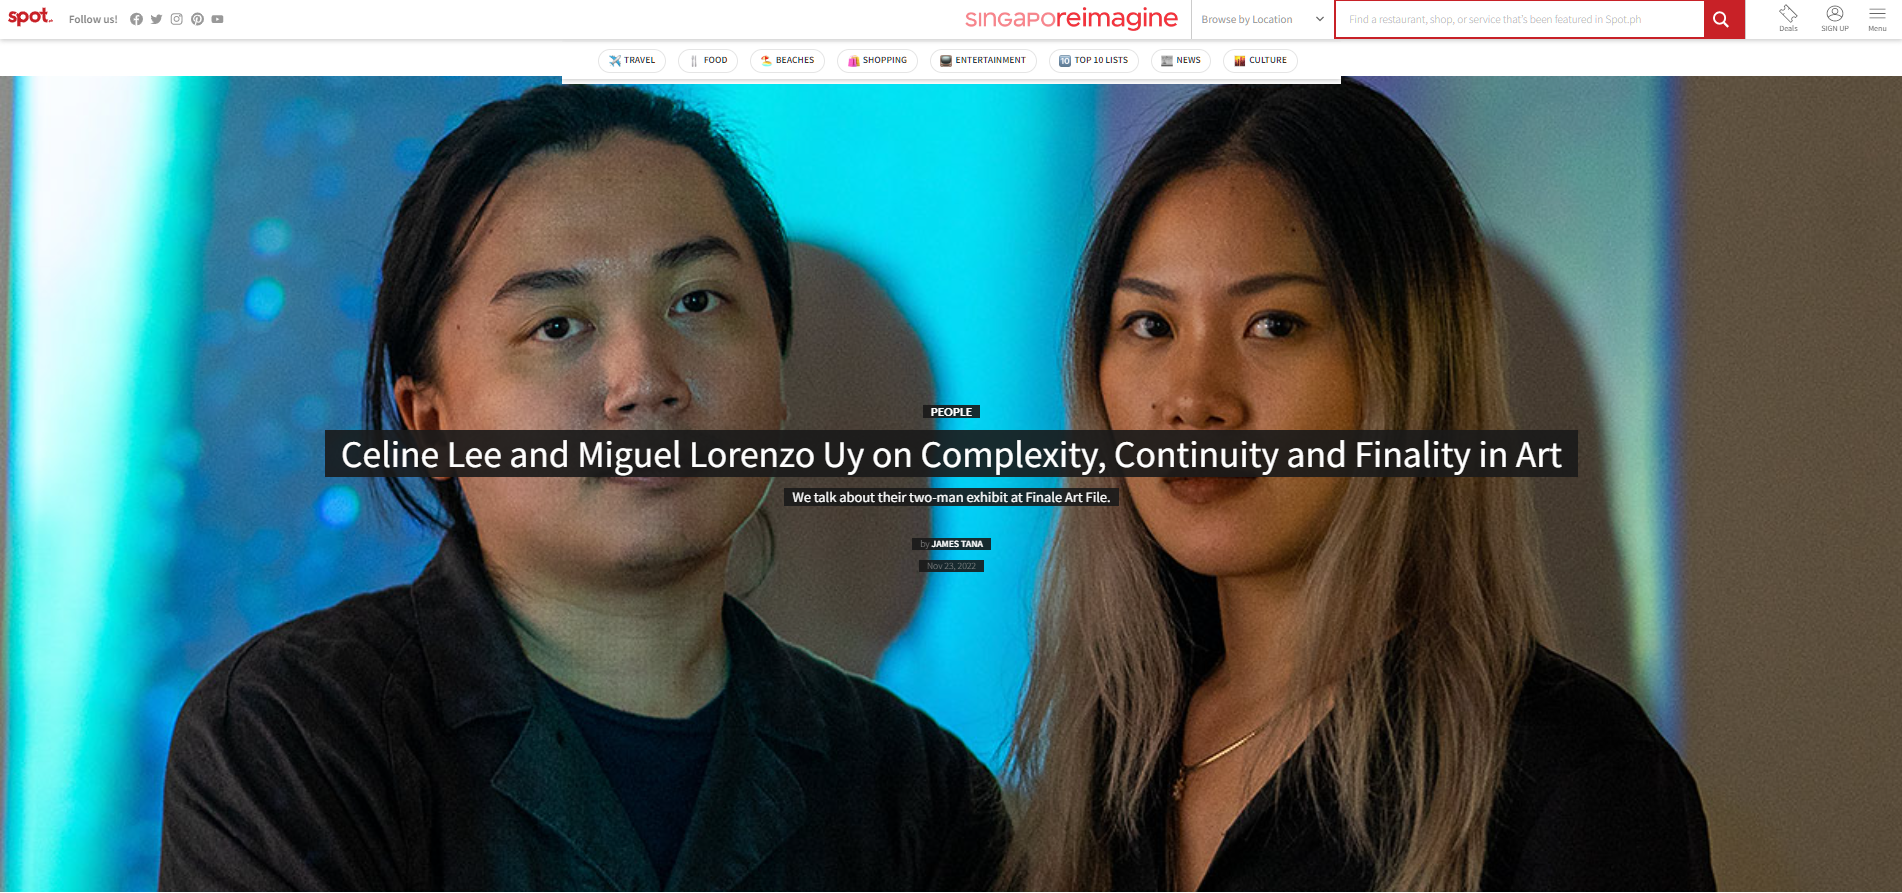 Tearsheets - Spot.PH: Celine Lee and Miguel Lorenzo Uy on Complexity, Continuity and Finality in Art We talk about their two-man exhibit at Finale Art File